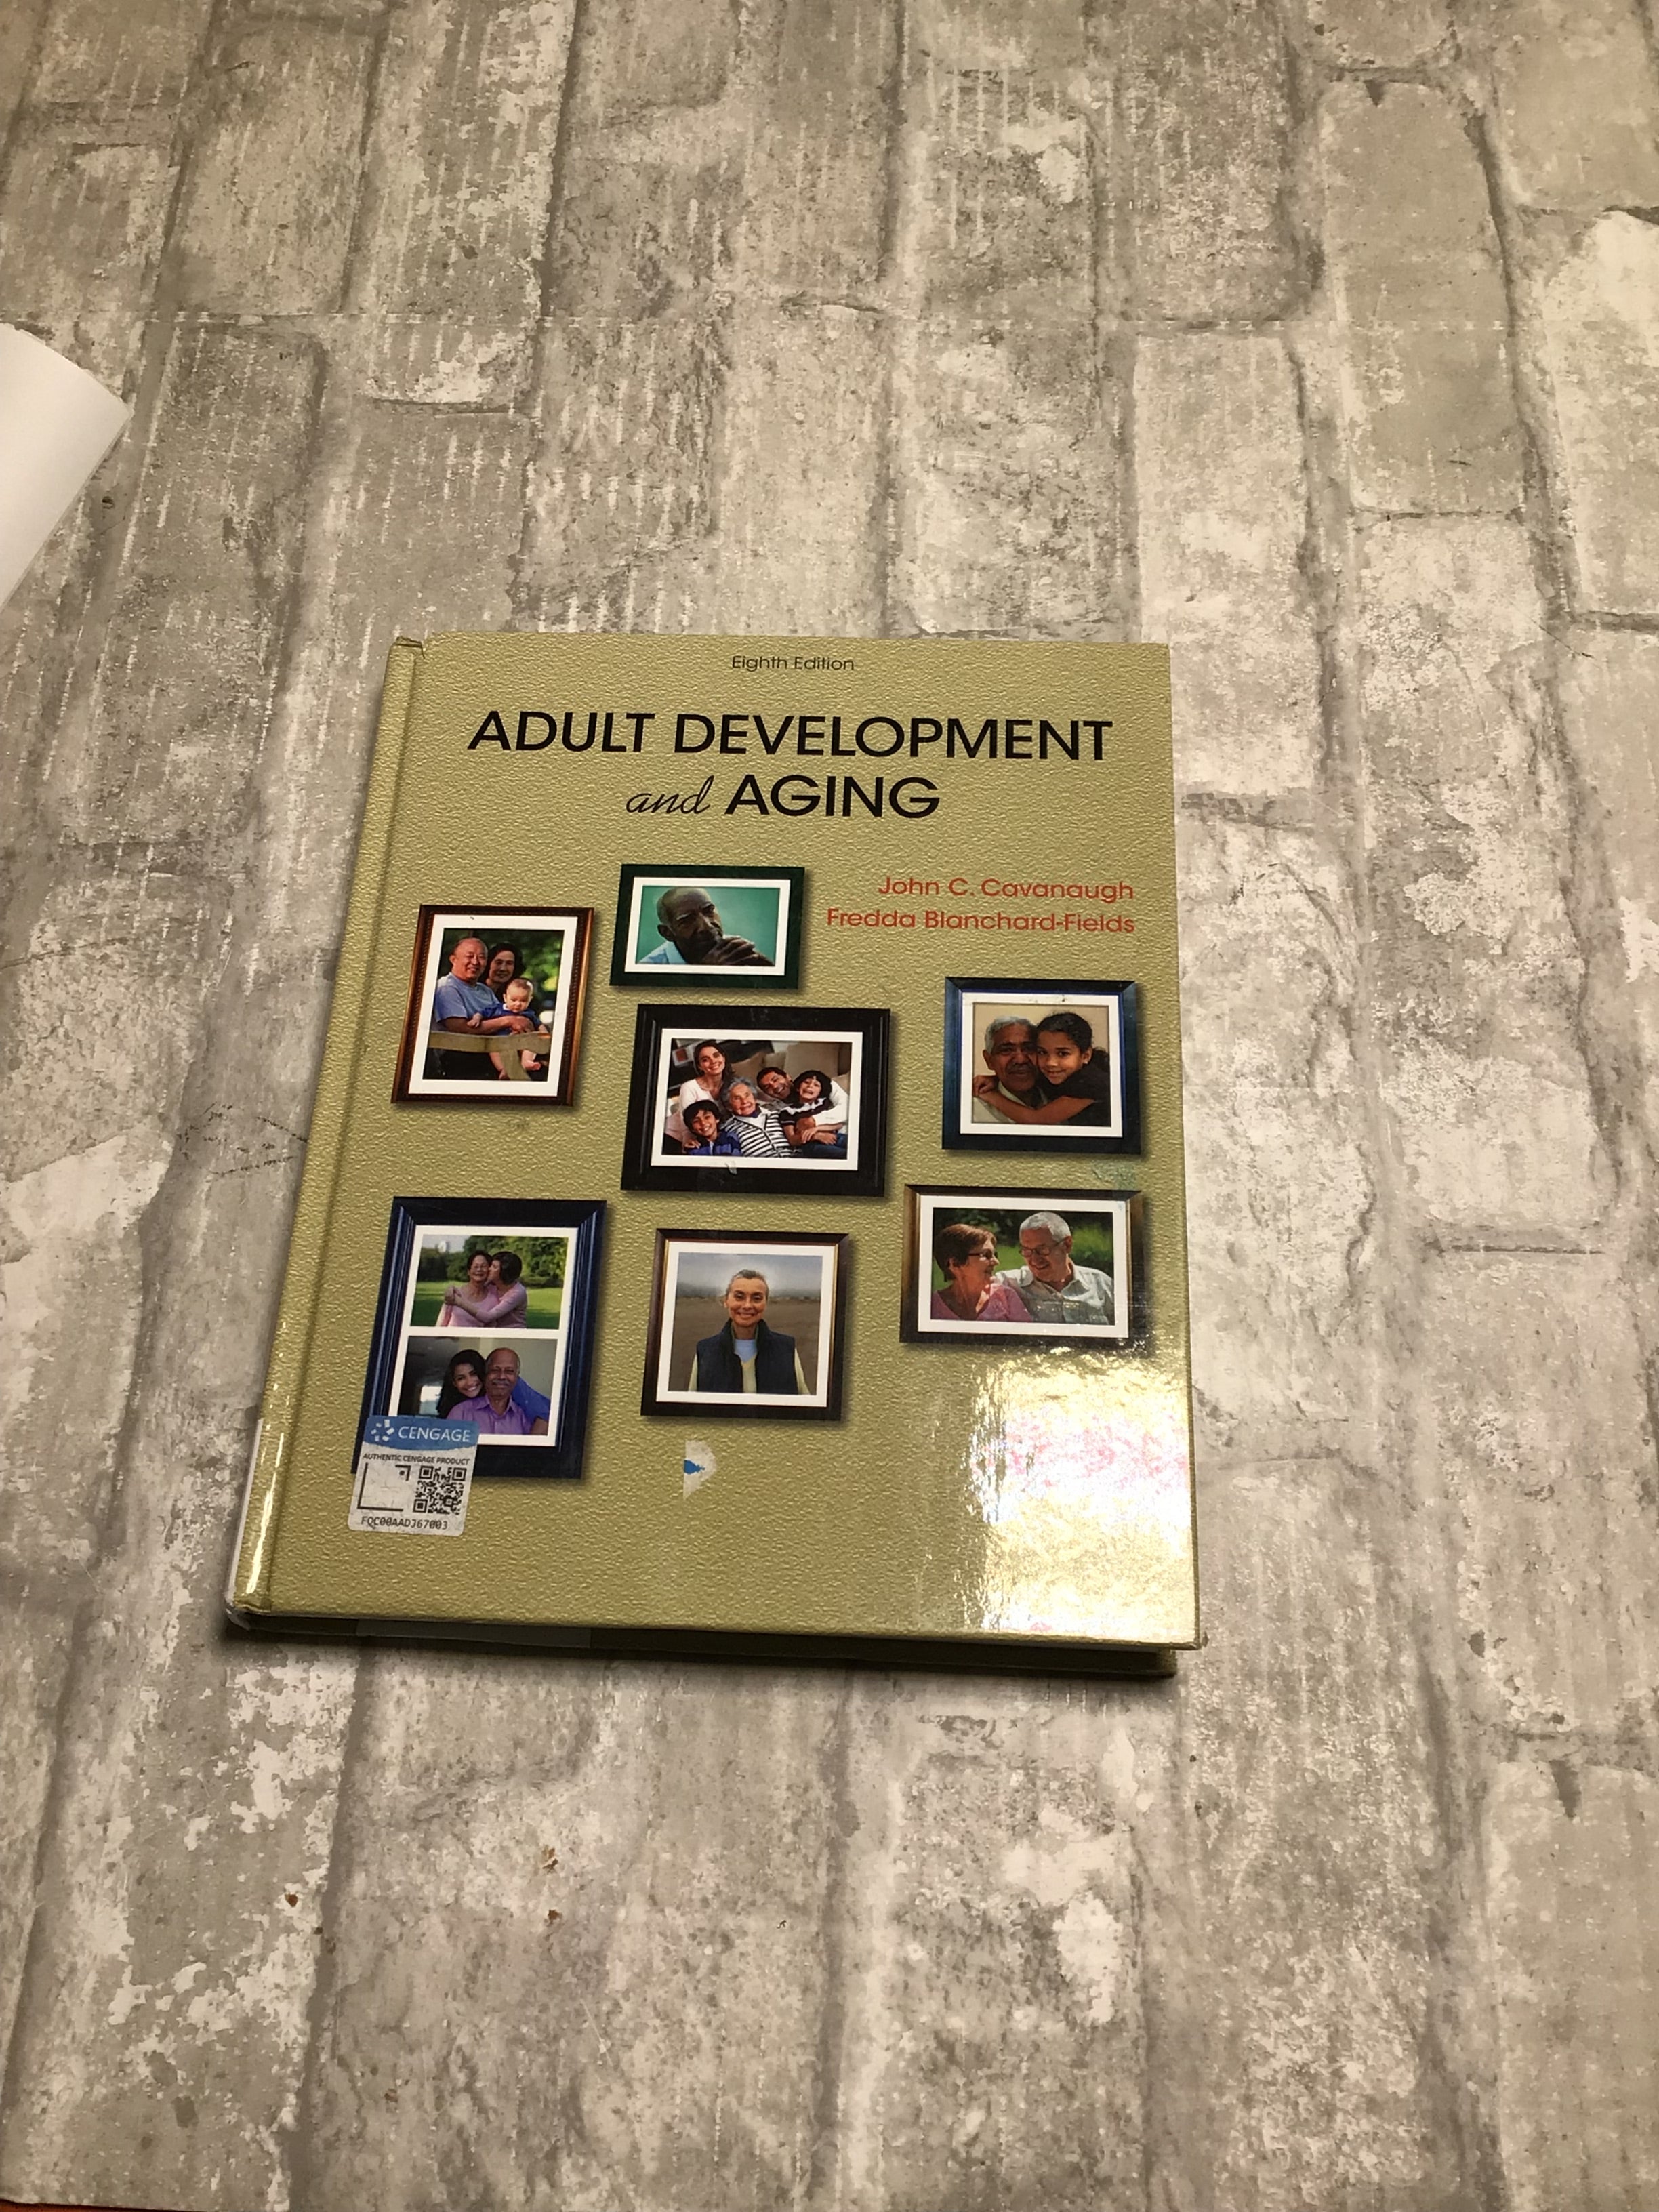 Adult Development and Aging 8th Edition (8220523233518)